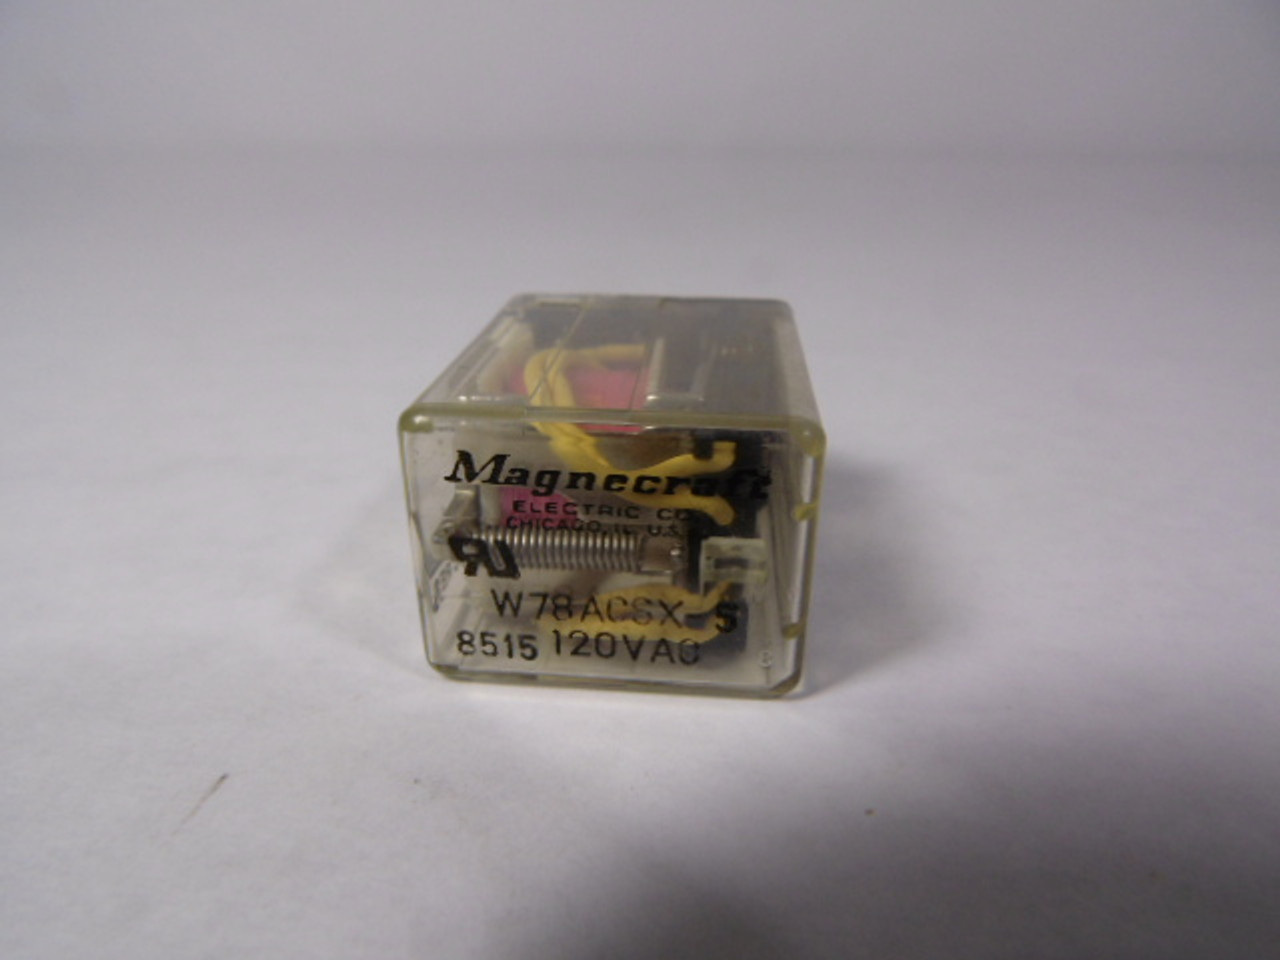 Magnecraft W78ACSX-5 Plug-In Relay 3amp 120VAC USED